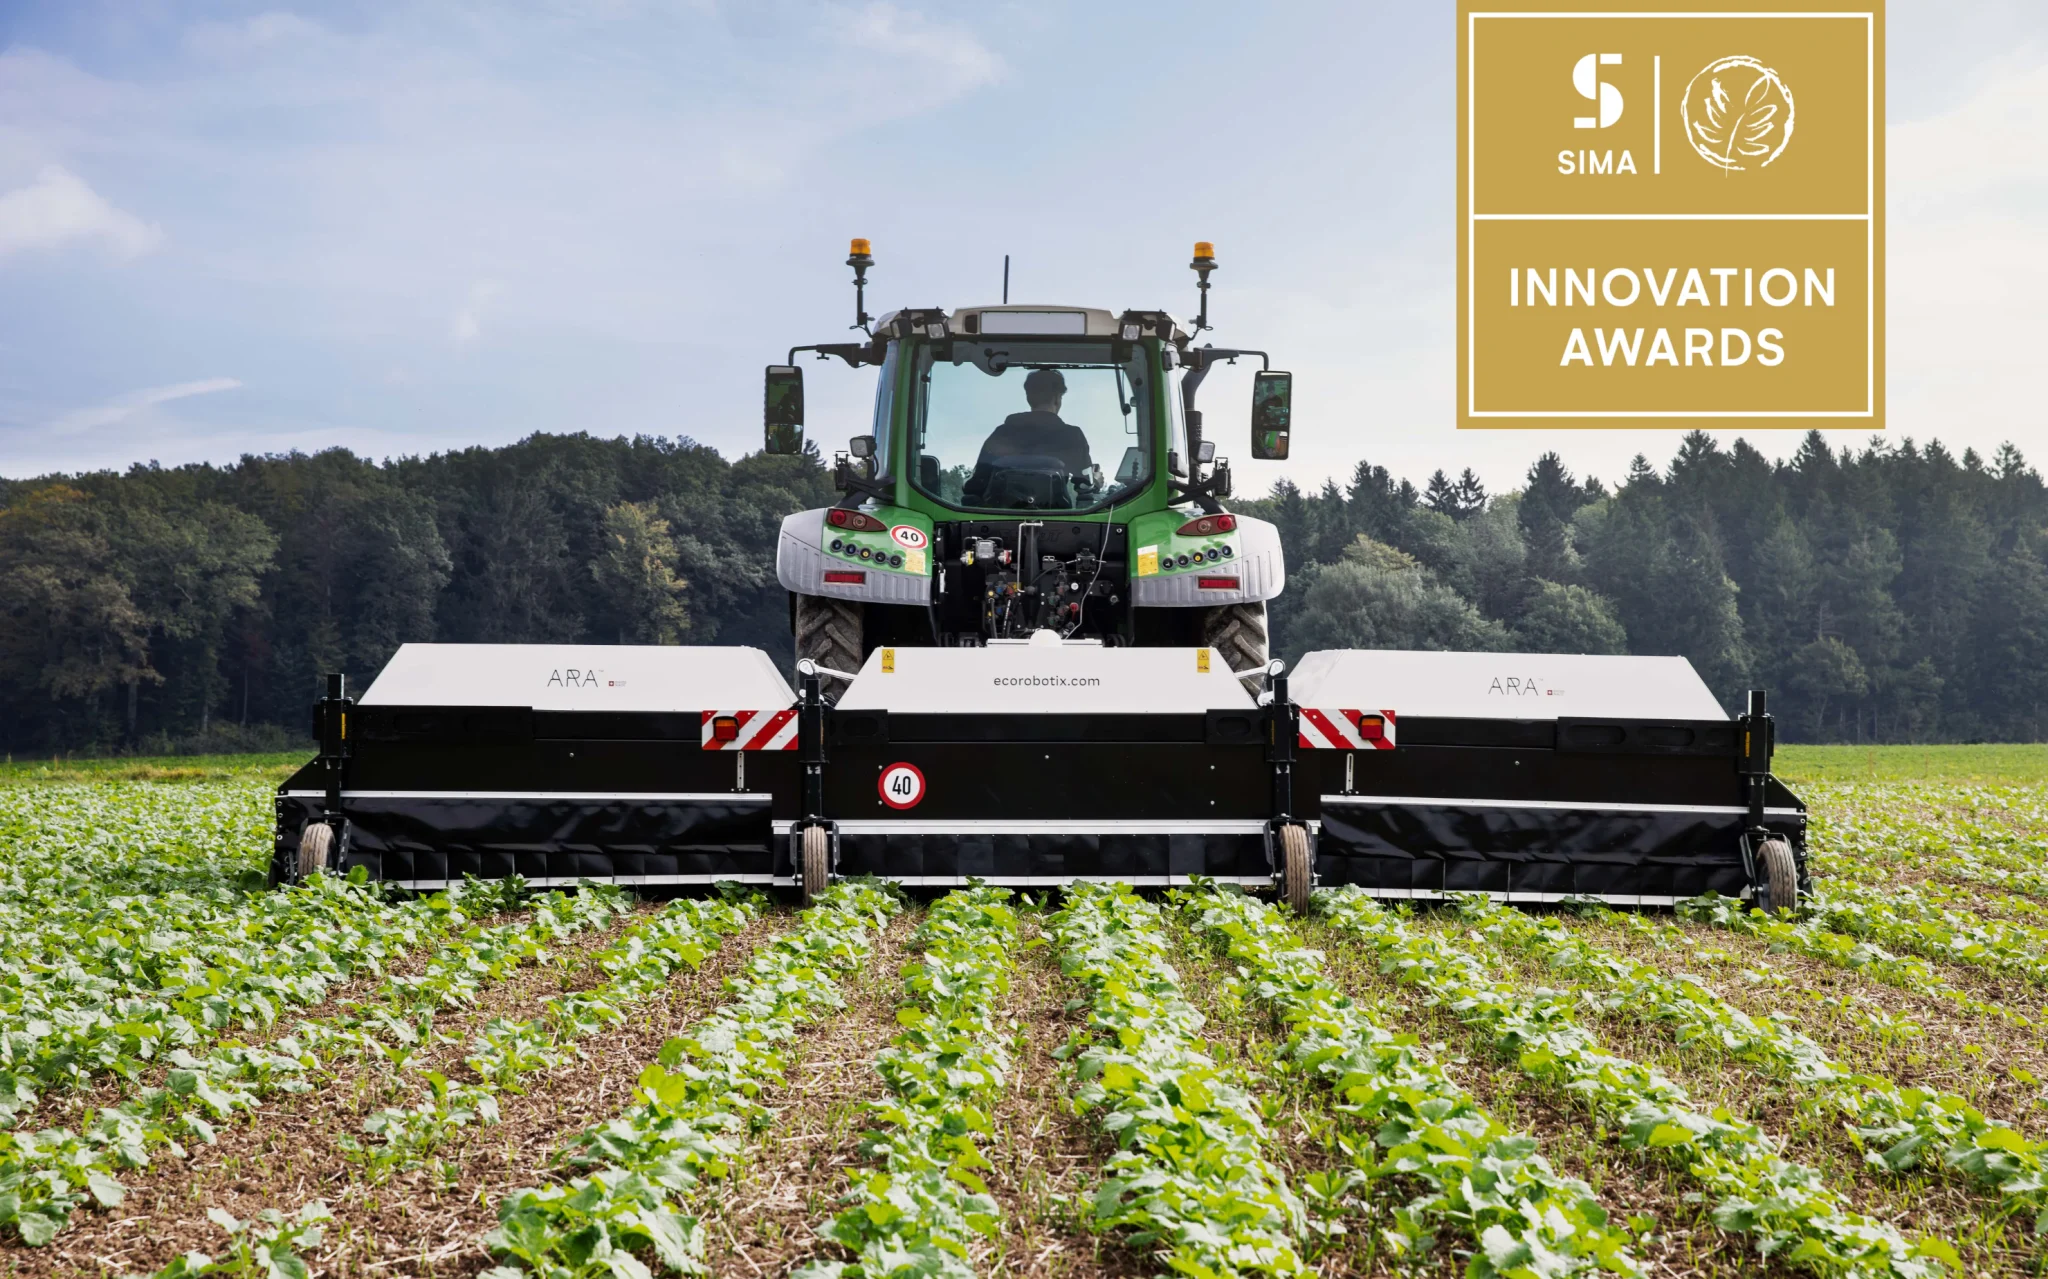 Smart spraying for ultra-localised treatments of your row crops, pastures and lawns